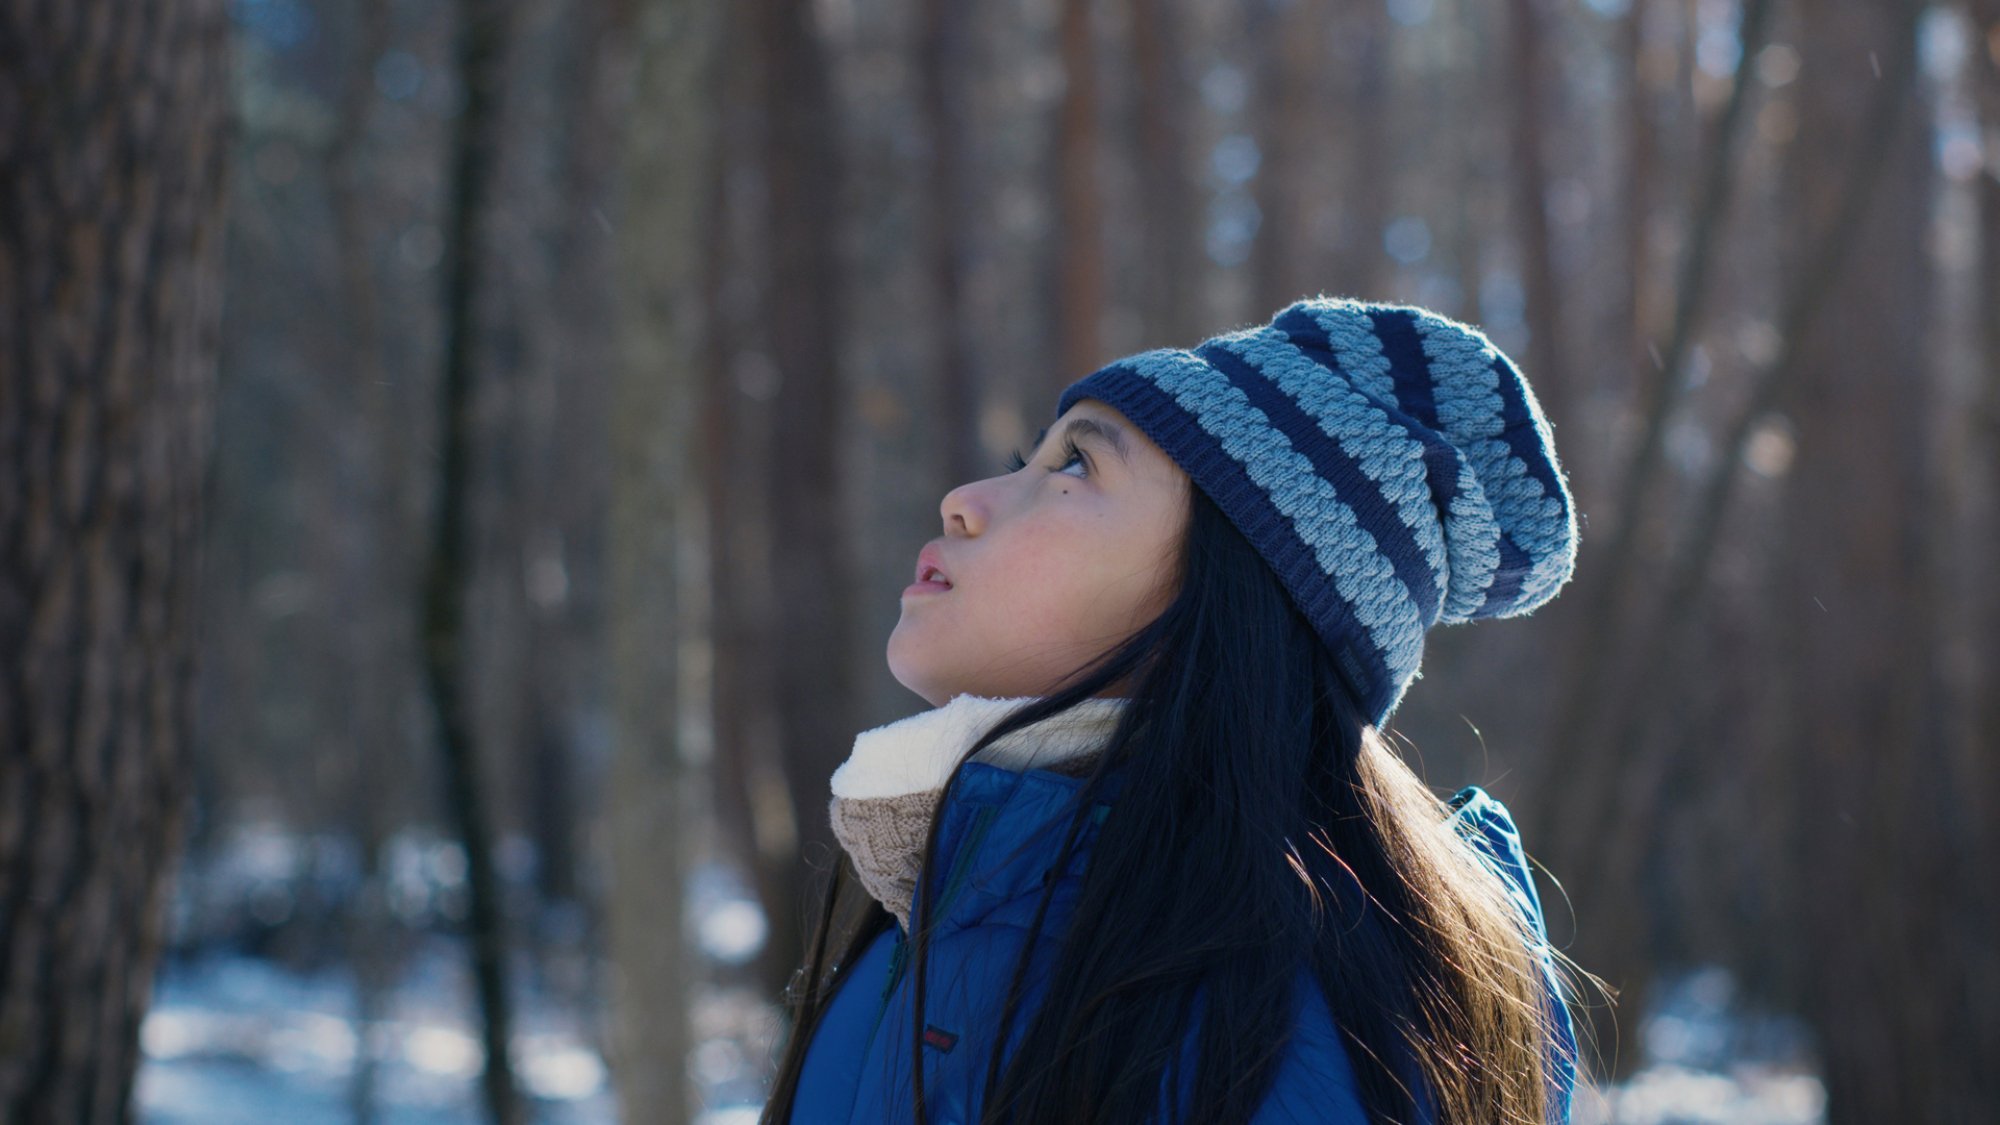 A young girl in winter clothing stands in a wood looking up at the sky.